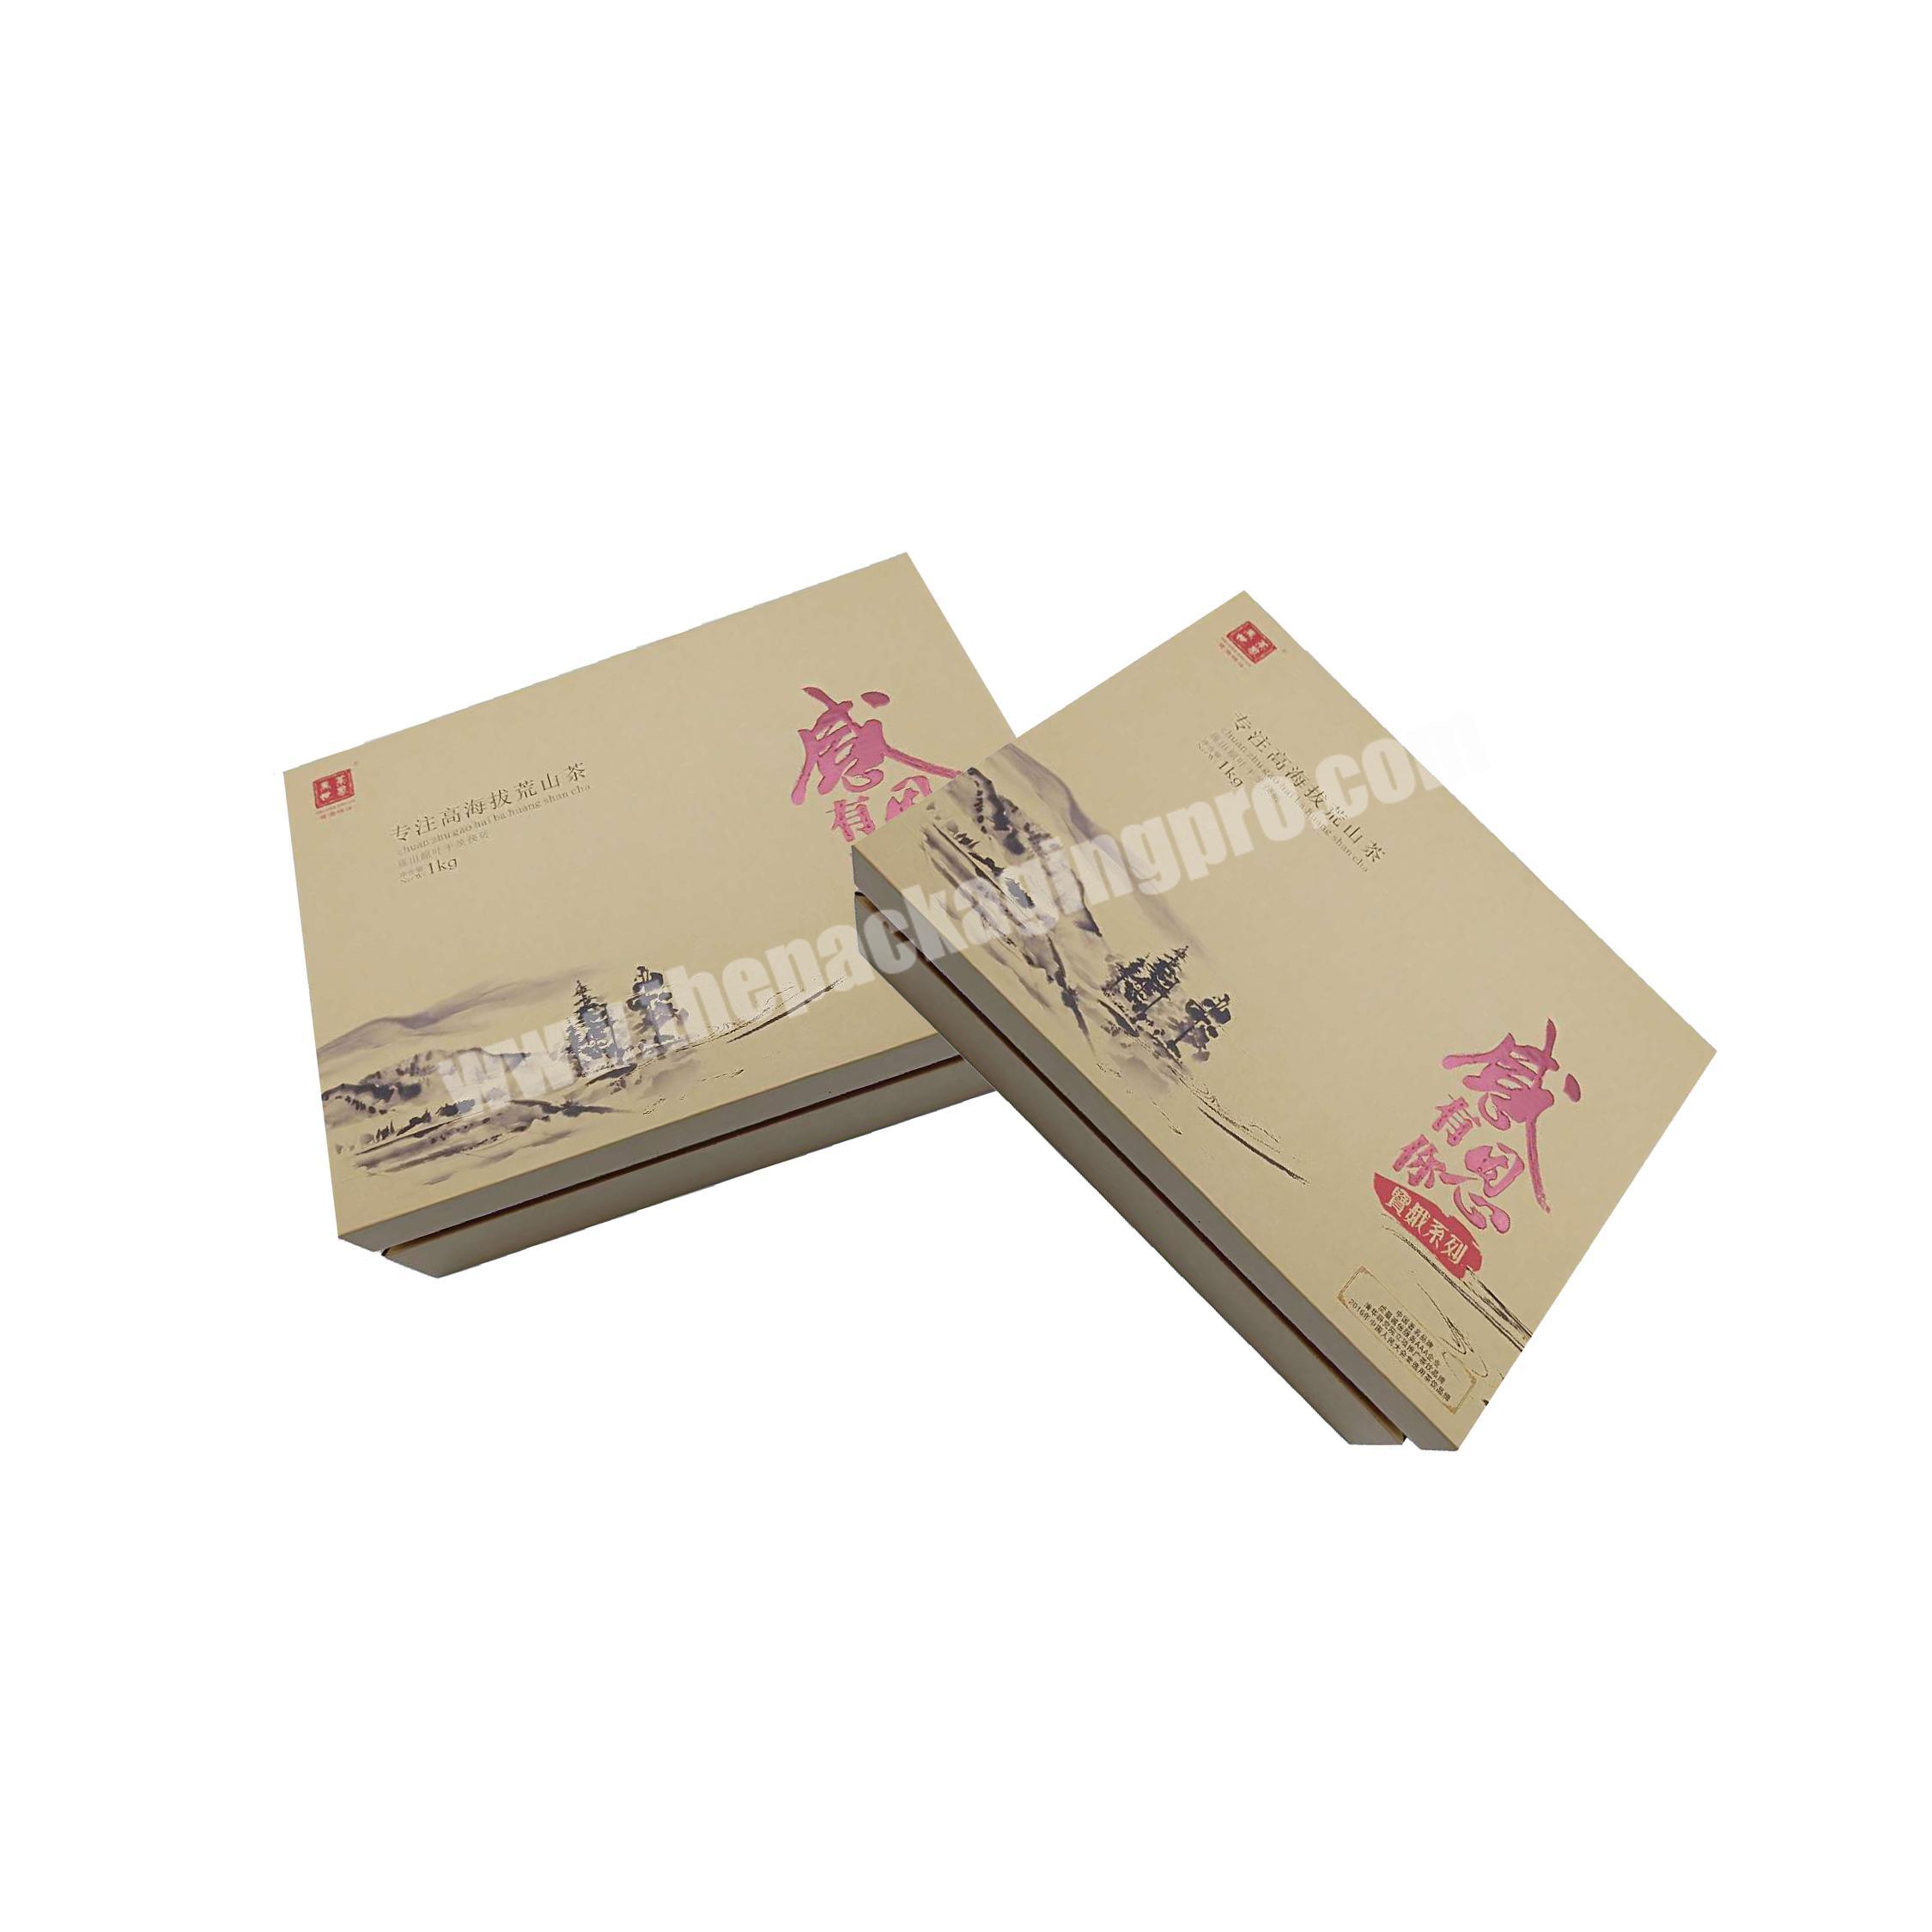 Refined chinese tea gift box recycled paper bag rectangular boxes for packaging